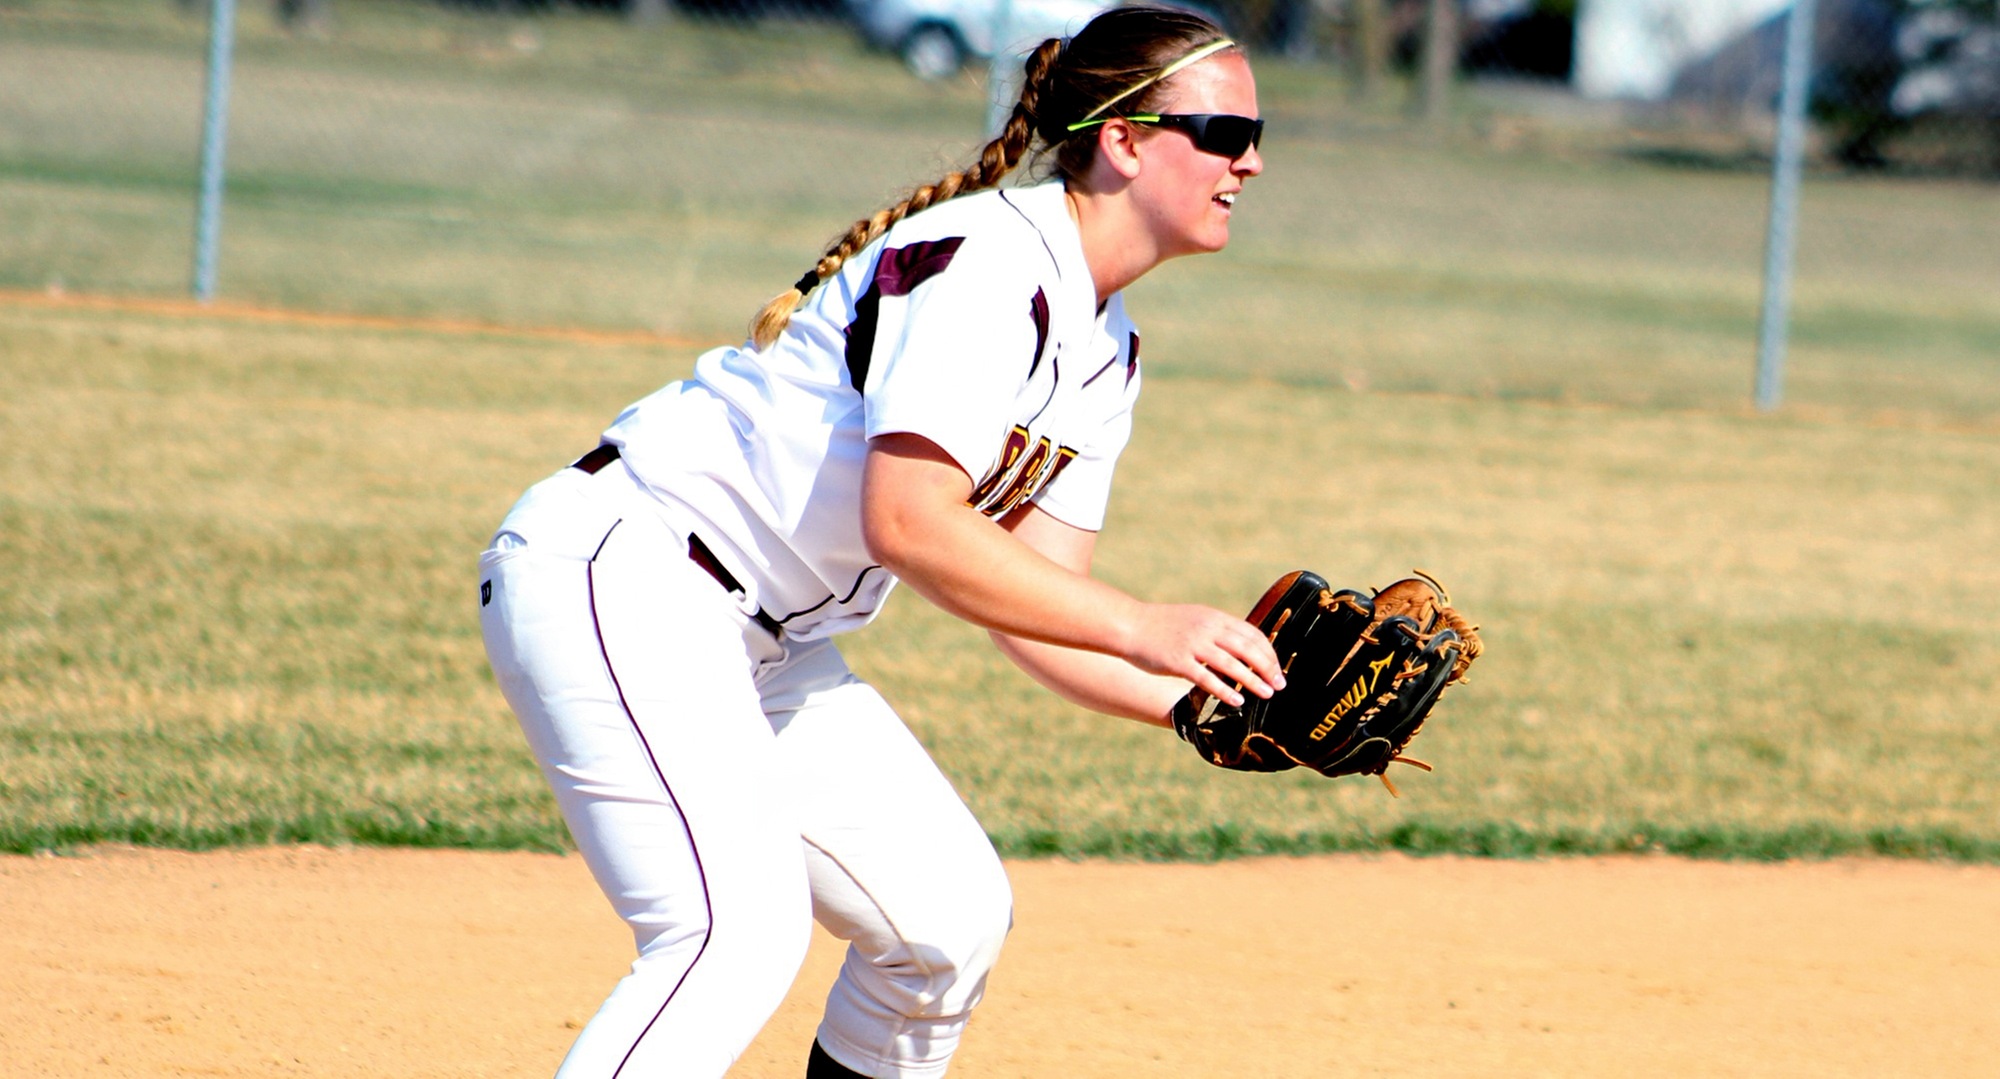 Junior Devonie Smith had a hit in both games in the Cobbers' doubleheader at Bethel.